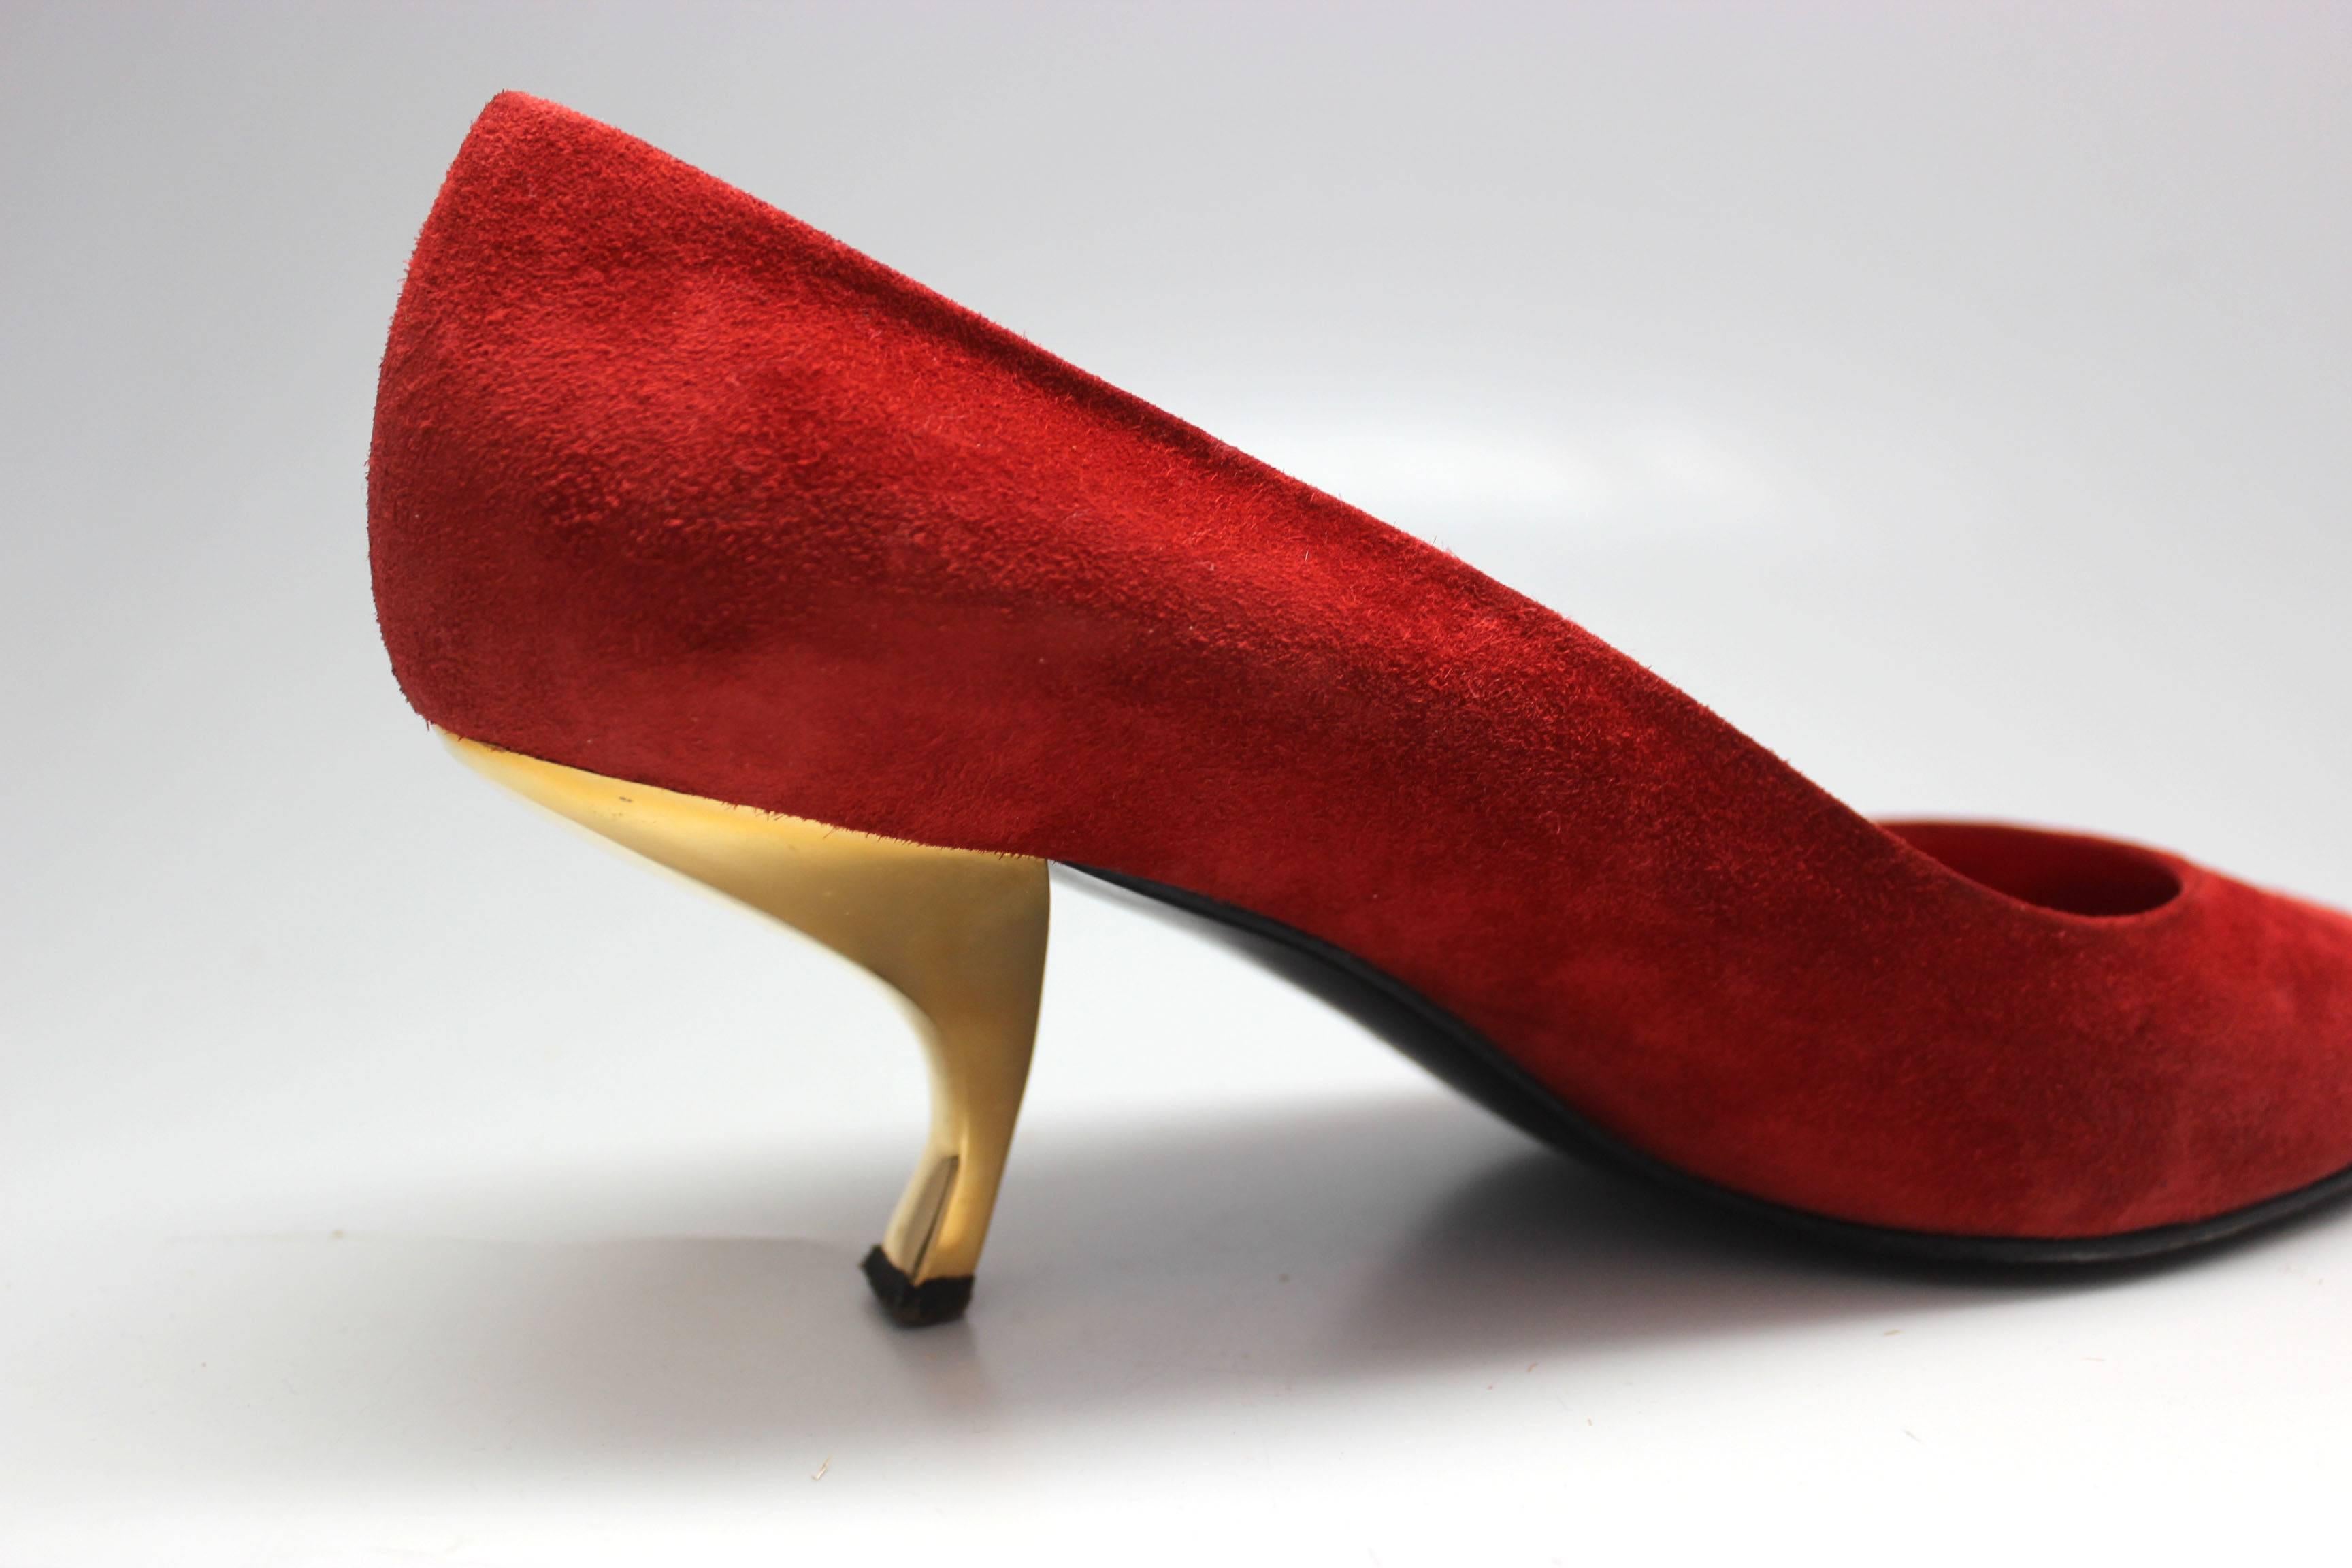 Roger Vivier Red Suede Comma or 'Virgule' Heel In Excellent Condition For Sale In New York, NY